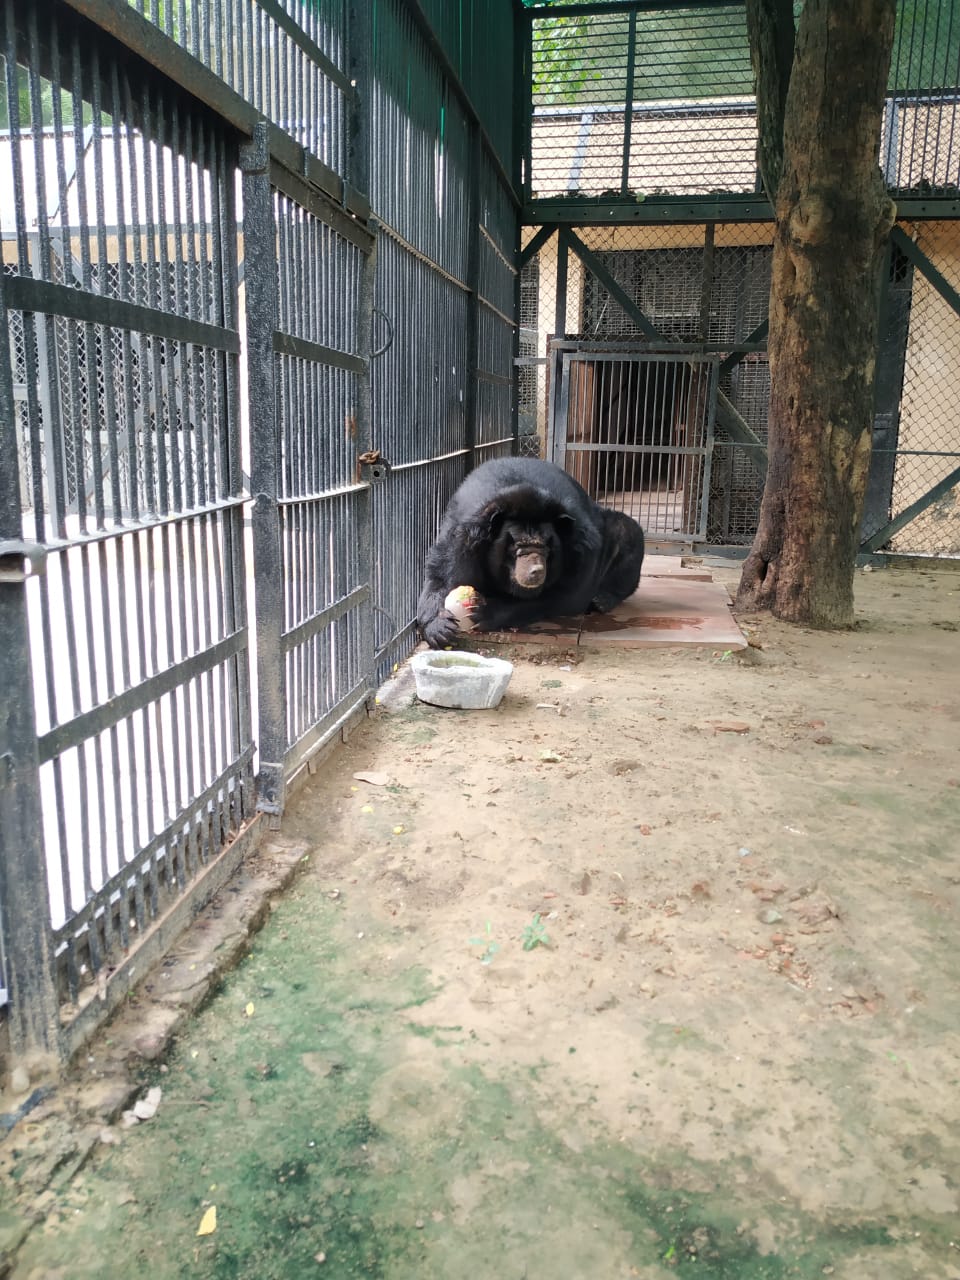 Delhi zoo lets bear out in the open, after ages - The Patriot